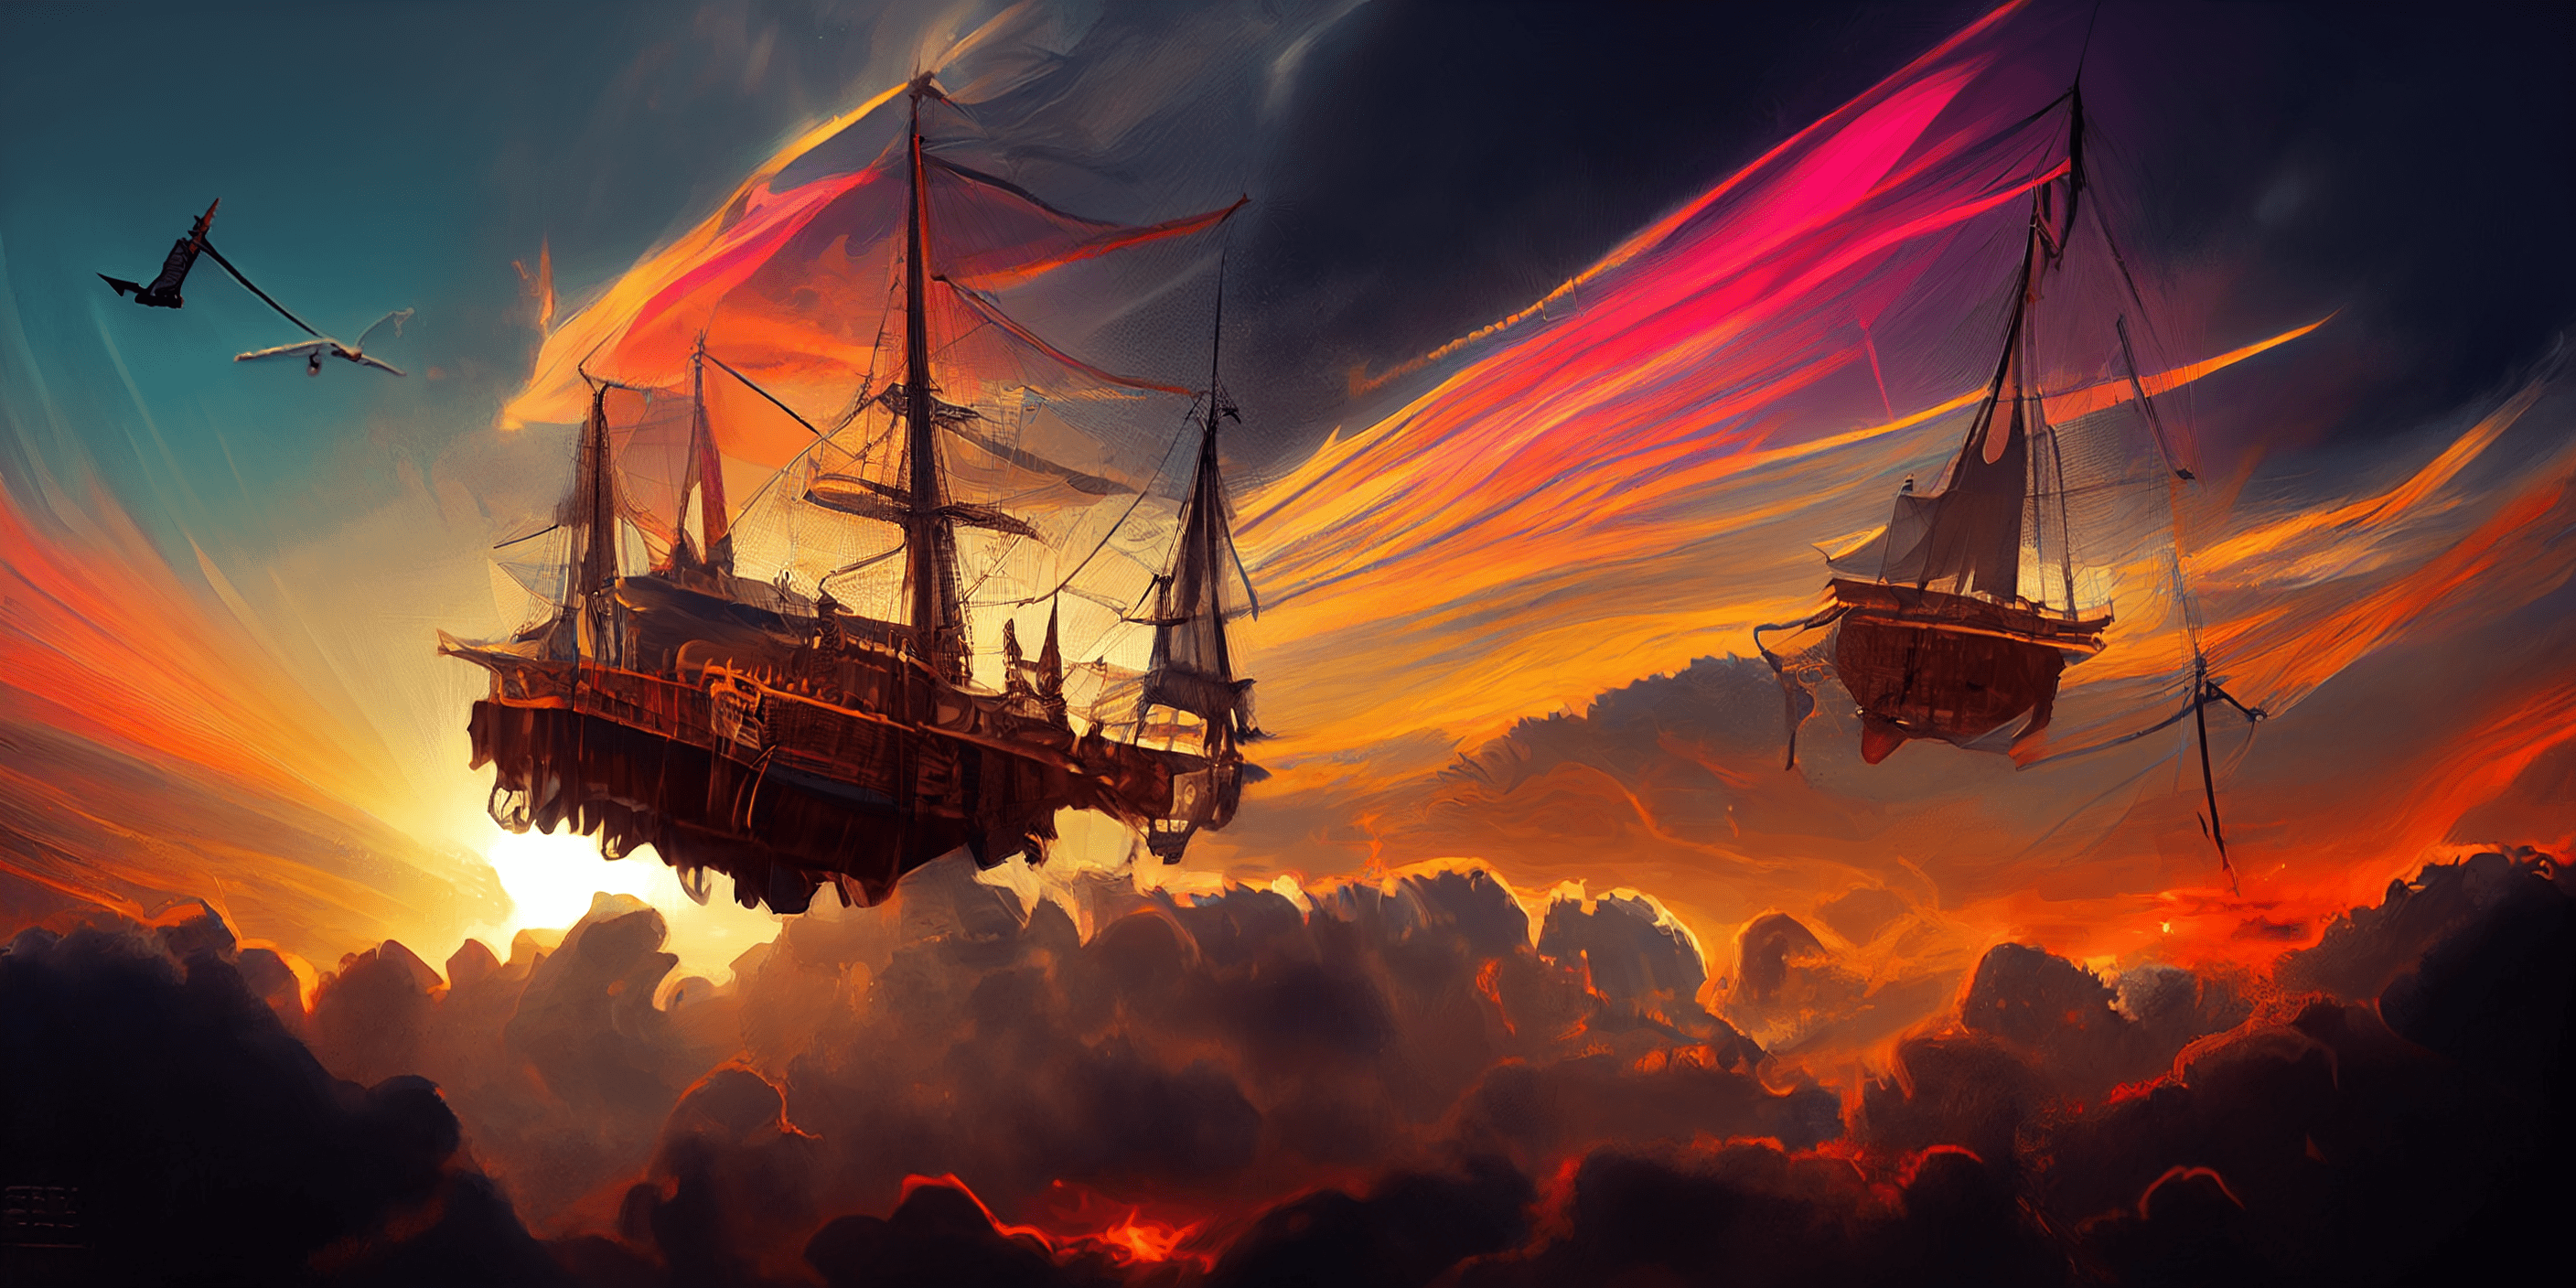 Two ships floating in the clouds - Pirate